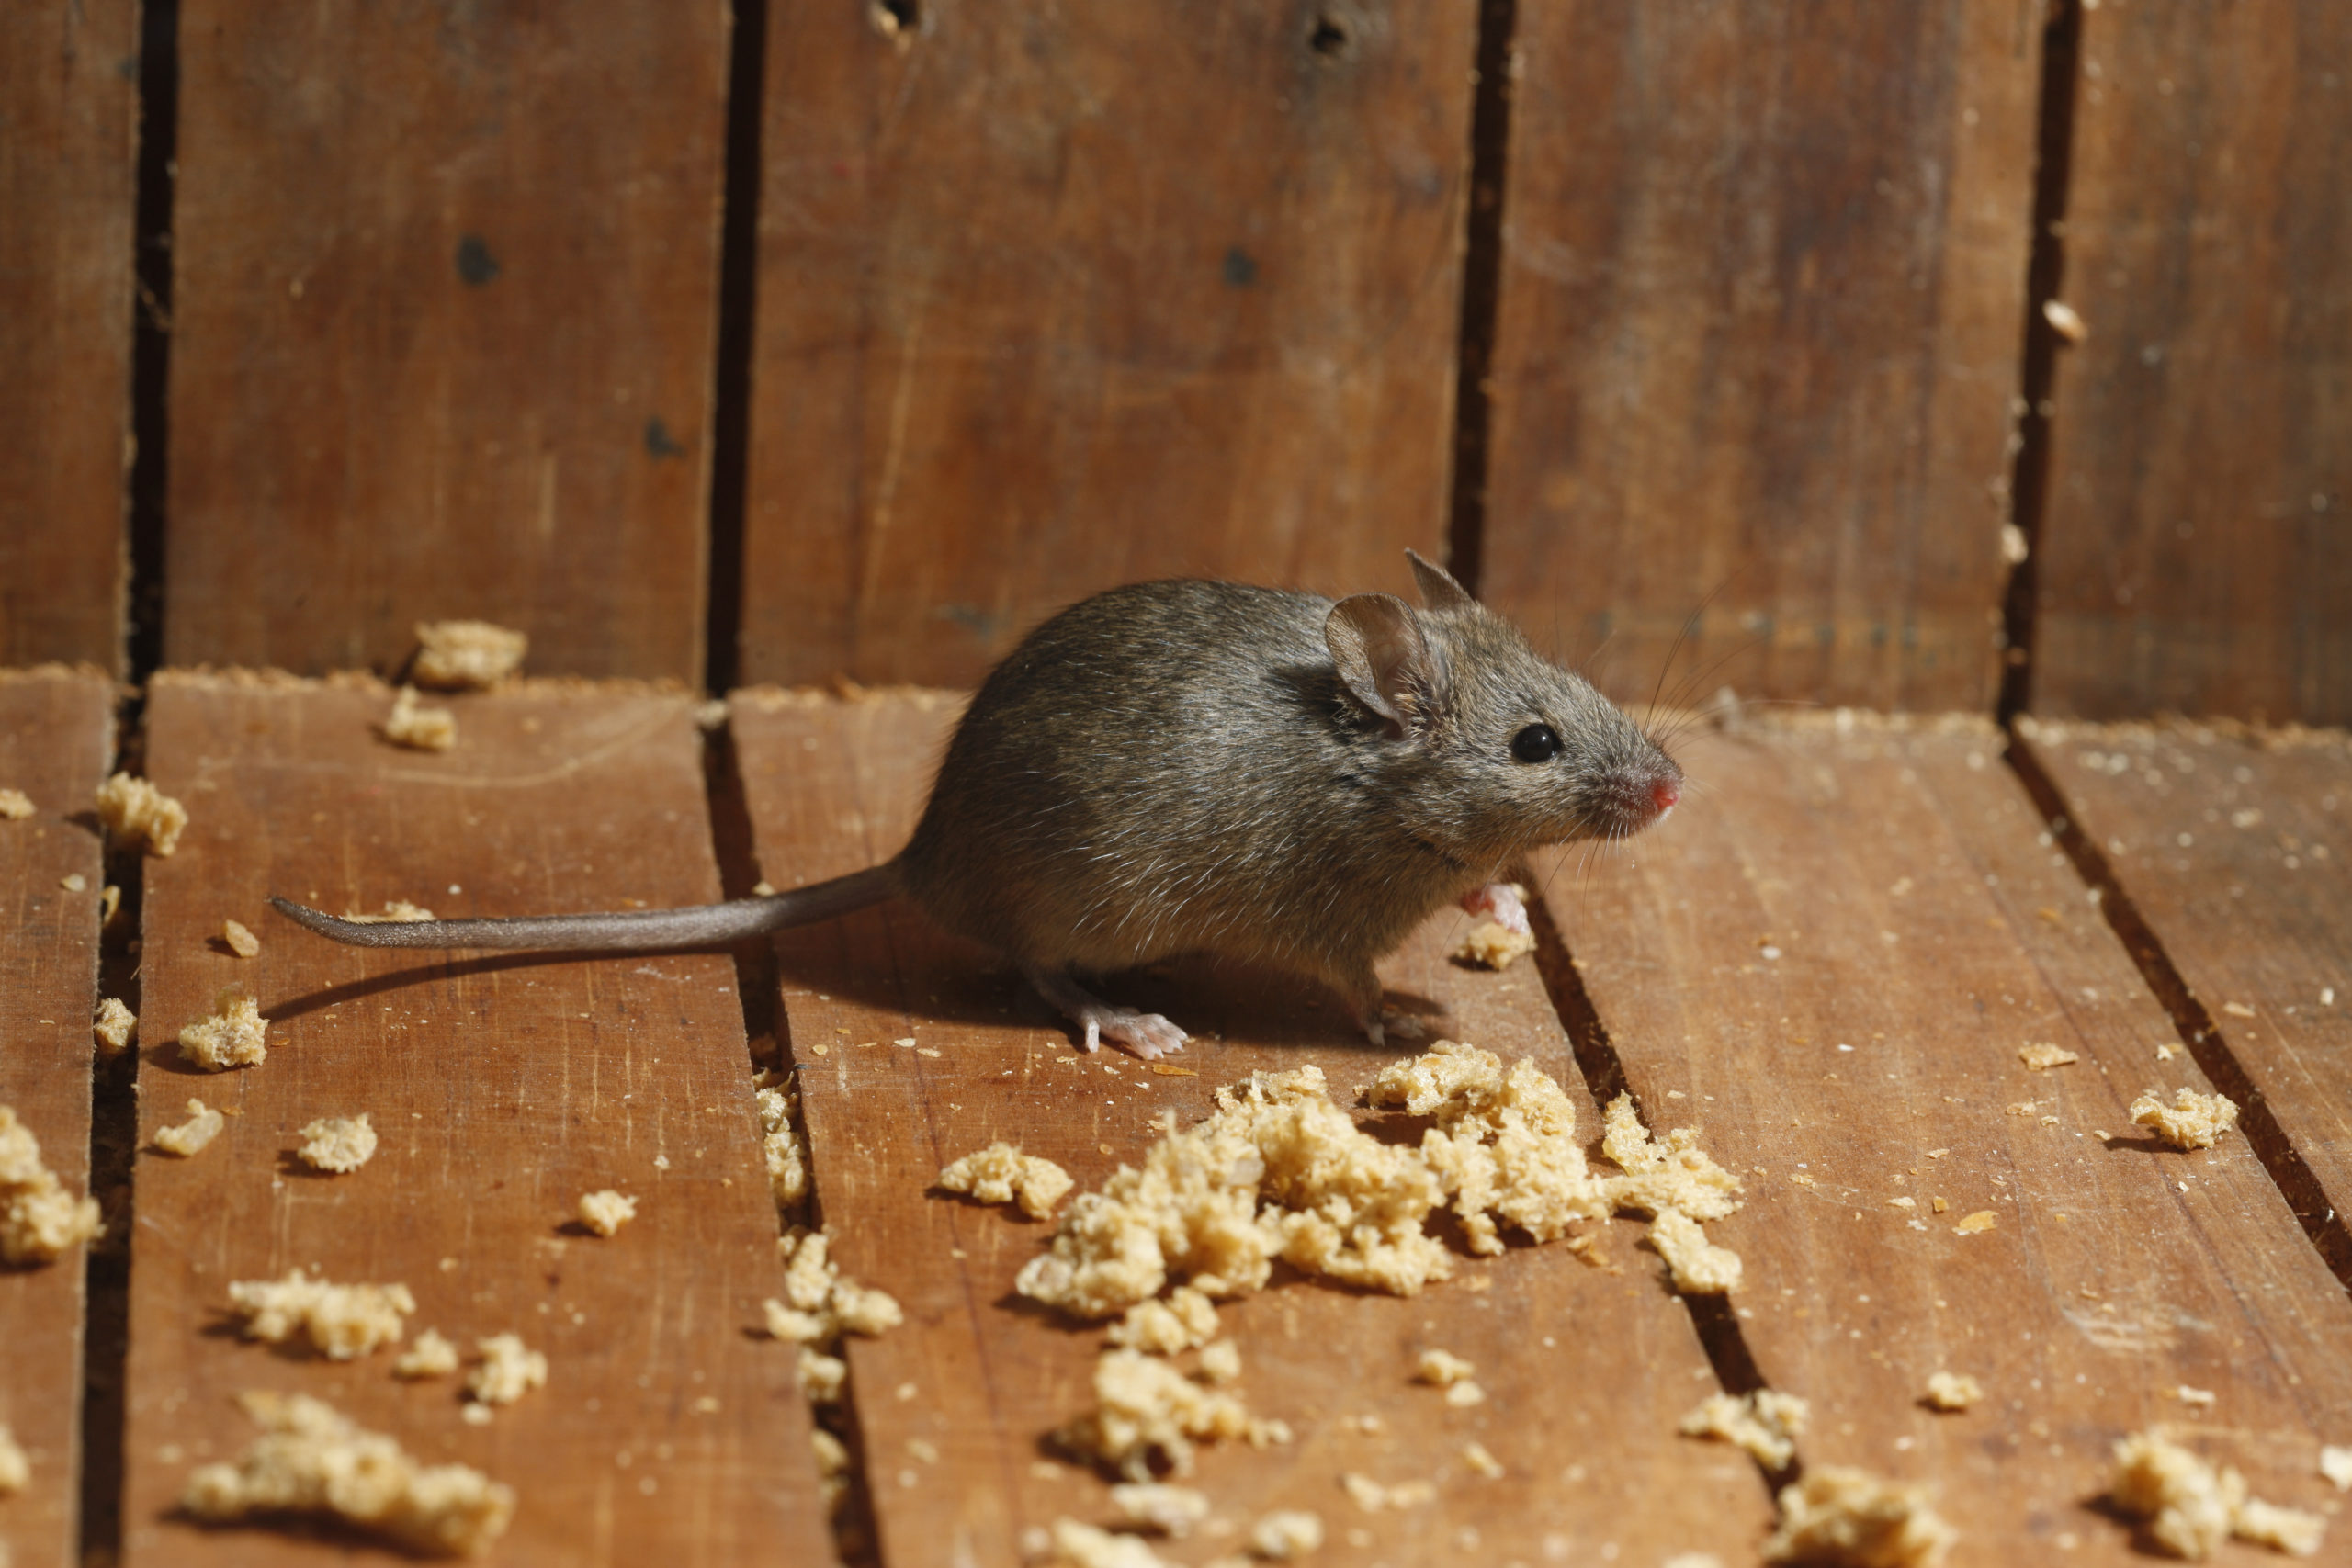 Beverage smoke Hong Kong Is Something Scratching? What to Do if There are Mice in Your Attic